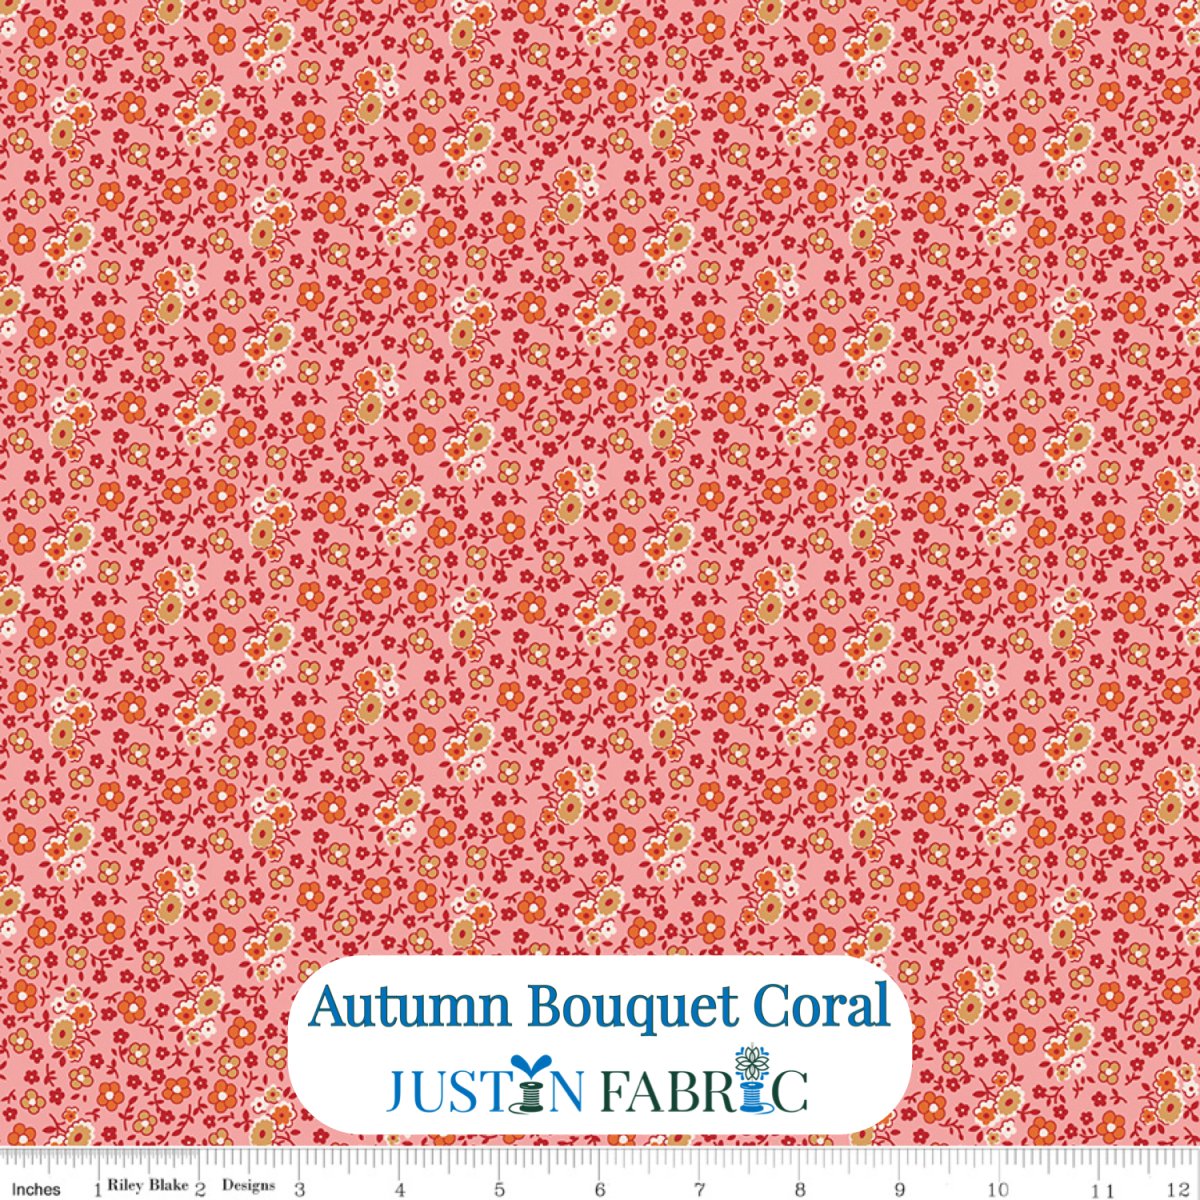 Autumn Bouquet Coral Cotton Yardage by Lori Holt | Riley Blake Designs -C14656-CORAL - Justin Fabric!